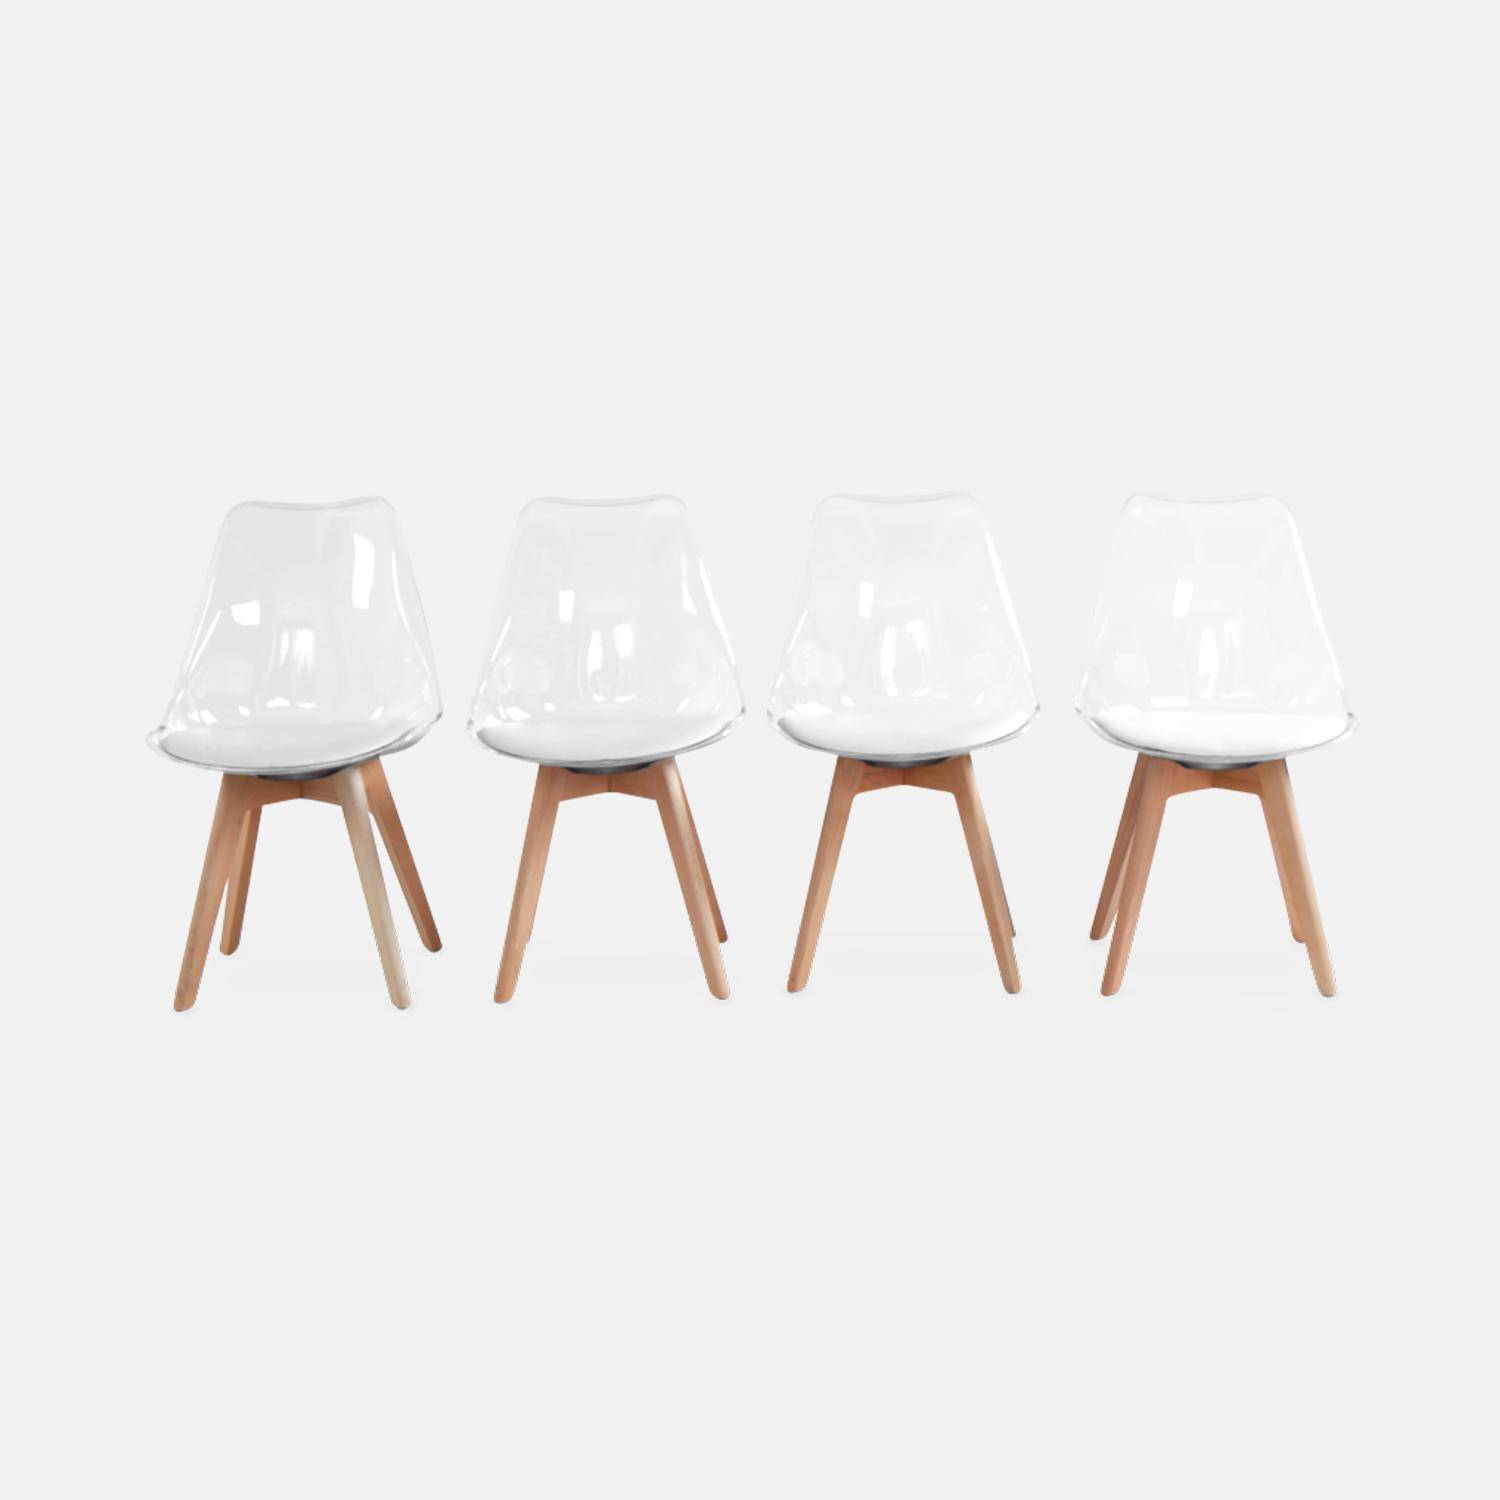 Set of 4 Scandi-style dining chairs with wooden legs, 100% leather cushions and acrylic shell - Lagertha - Clear and White,sweeek,Photo4